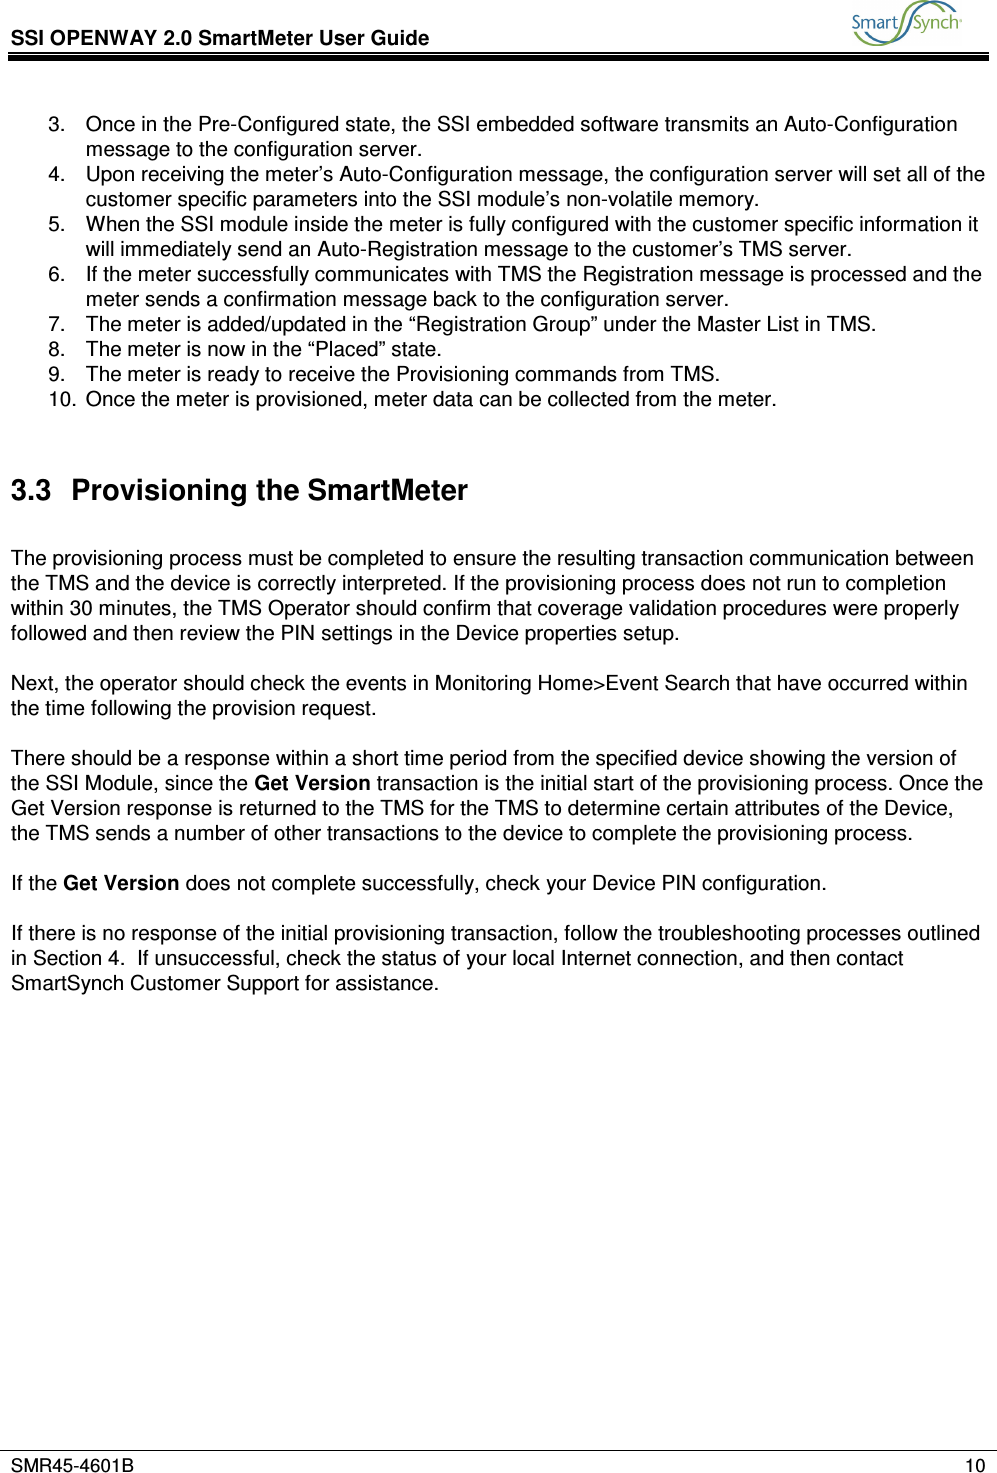 SSI OPENWAY 2.0 SmartMeter User Guide           SMR45-4601B    10  3.  Once in the Pre-Configured state, the SSI embedded software transmits an Auto-Configuration message to the configuration server. 4.  Upon receiving the meter’s Auto-Configuration message, the configuration server will set all of the customer specific parameters into the SSI module’s non-volatile memory. 5.  When the SSI module inside the meter is fully configured with the customer specific information it will immediately send an Auto-Registration message to the customer’s TMS server. 6.  If the meter successfully communicates with TMS the Registration message is processed and the meter sends a confirmation message back to the configuration server. 7.  The meter is added/updated in the “Registration Group” under the Master List in TMS. 8.  The meter is now in the “Placed” state. 9.  The meter is ready to receive the Provisioning commands from TMS. 10.  Once the meter is provisioned, meter data can be collected from the meter.  3.3  Provisioning the SmartMeter  The provisioning process must be completed to ensure the resulting transaction communication between the TMS and the device is correctly interpreted. If the provisioning process does not run to completion within 30 minutes, the TMS Operator should confirm that coverage validation procedures were properly followed and then review the PIN settings in the Device properties setup.  Next, the operator should check the events in Monitoring Home&gt;Event Search that have occurred within the time following the provision request.   There should be a response within a short time period from the specified device showing the version of the SSI Module, since the Get Version transaction is the initial start of the provisioning process. Once the Get Version response is returned to the TMS for the TMS to determine certain attributes of the Device, the TMS sends a number of other transactions to the device to complete the provisioning process.  If the Get Version does not complete successfully, check your Device PIN configuration.  If there is no response of the initial provisioning transaction, follow the troubleshooting processes outlined in Section 4.  If unsuccessful, check the status of your local Internet connection, and then contact SmartSynch Customer Support for assistance. 